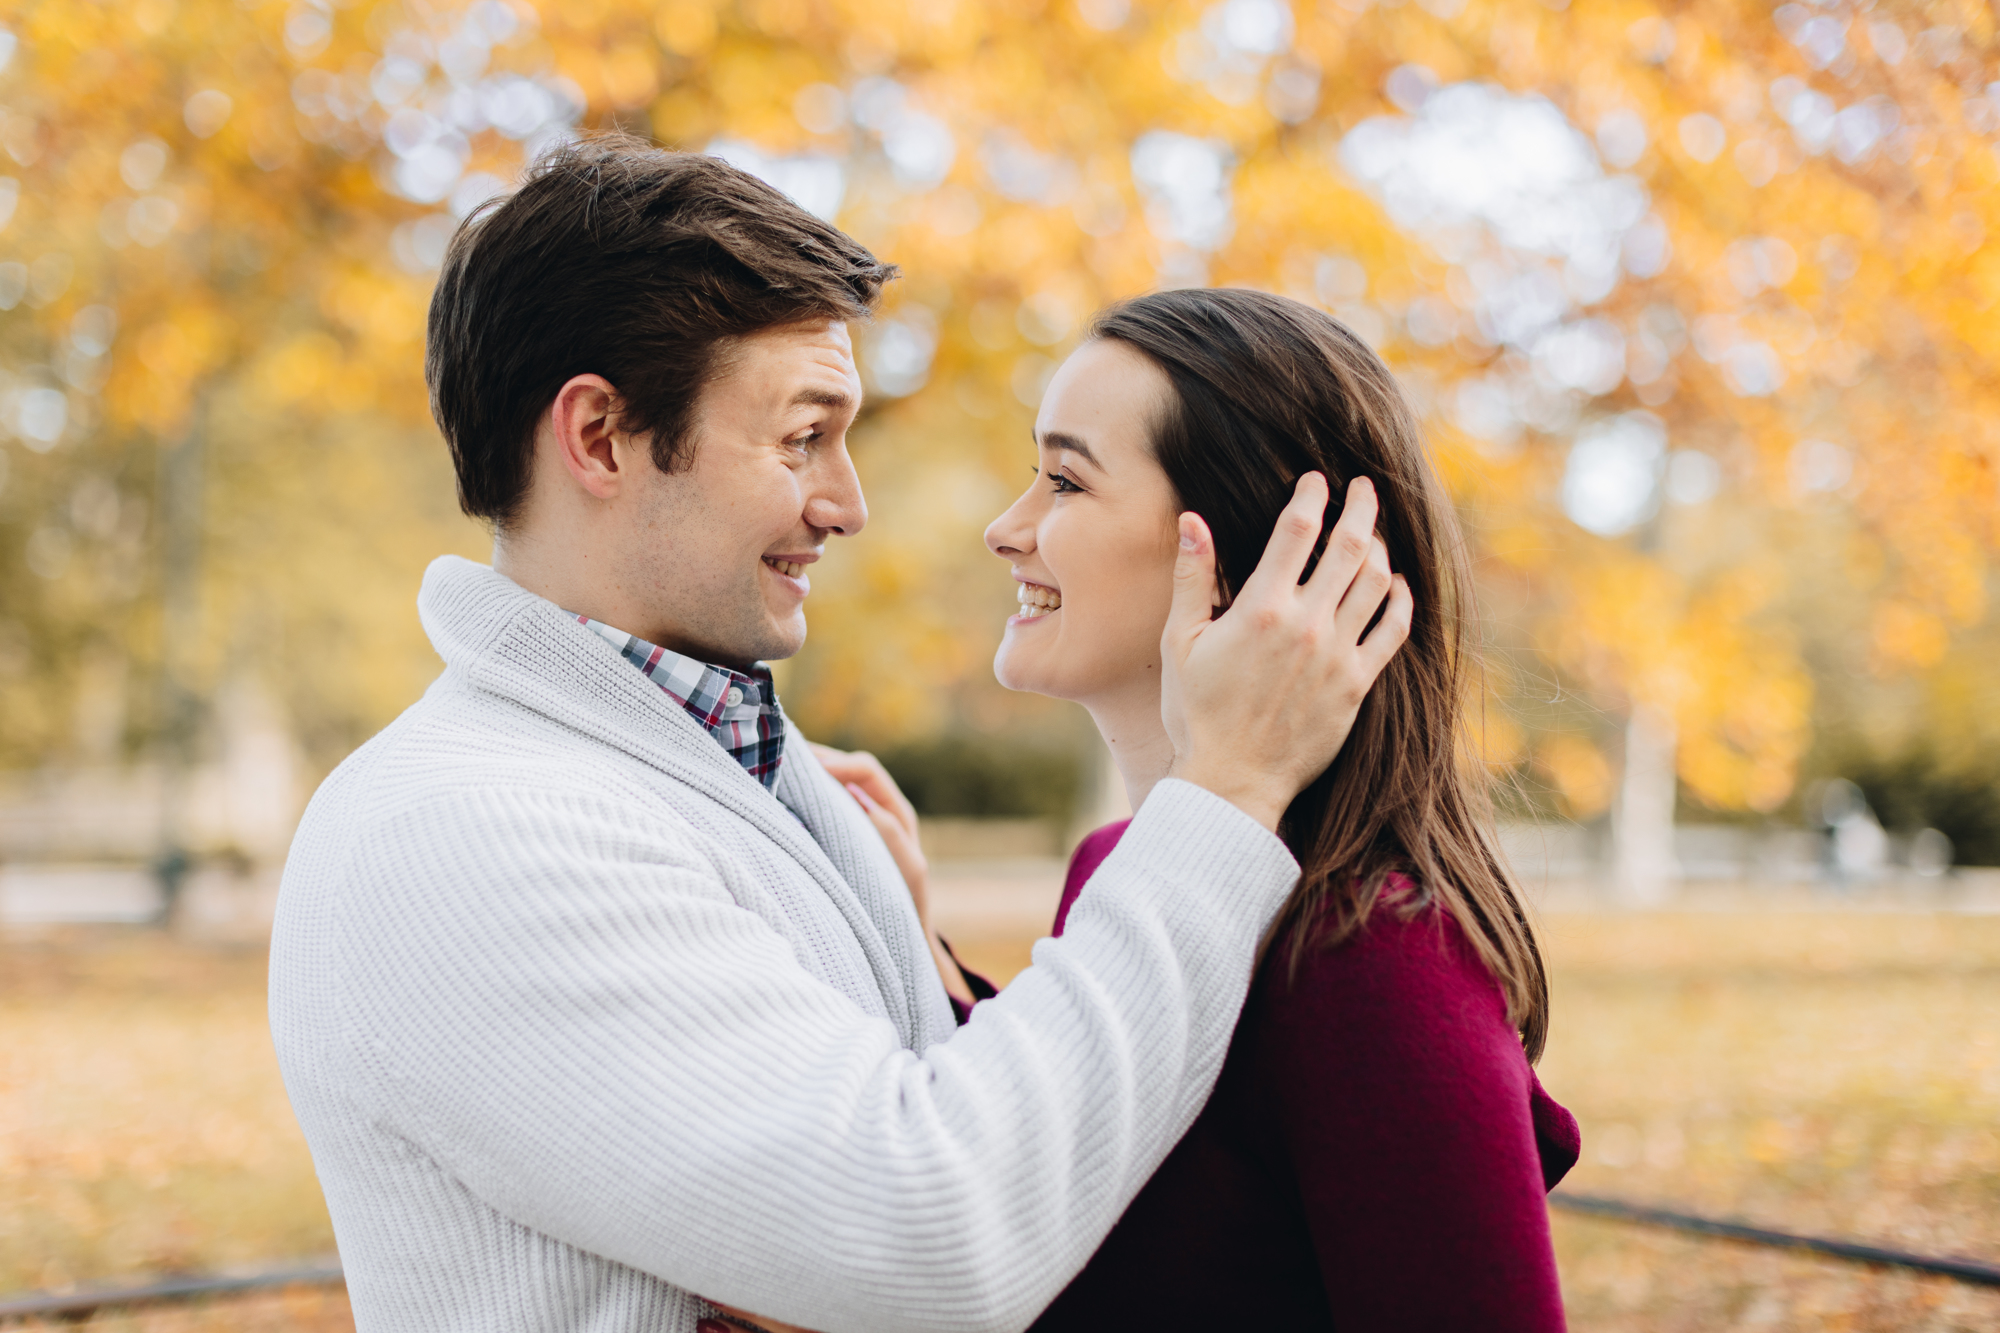 Idyllic Fall Engagement Photos in Central Park New York